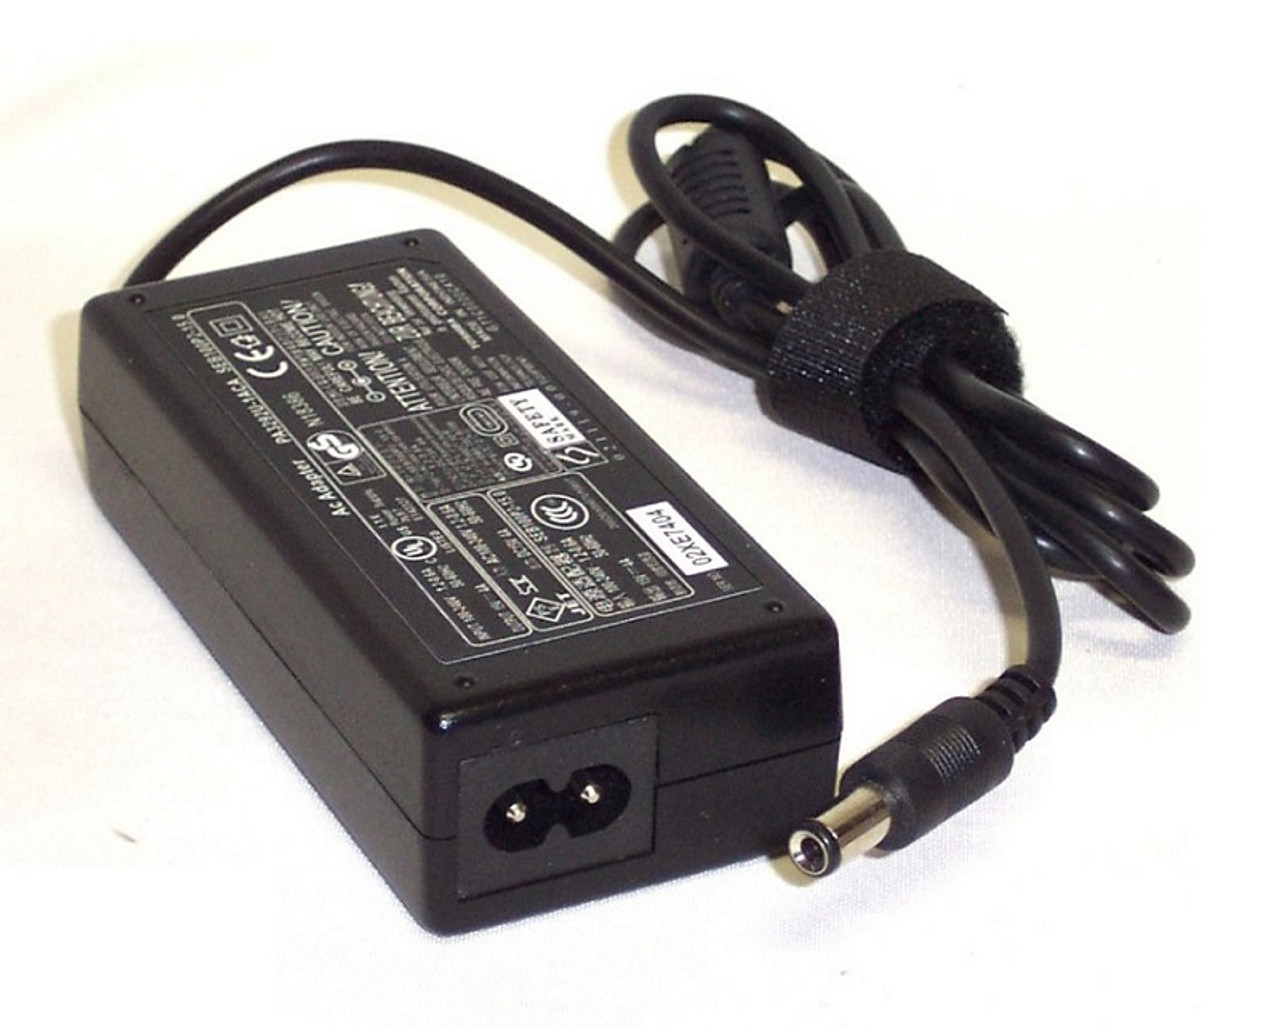 Y991K - Dell 19V 1.58A AC Adapter for Mini 10